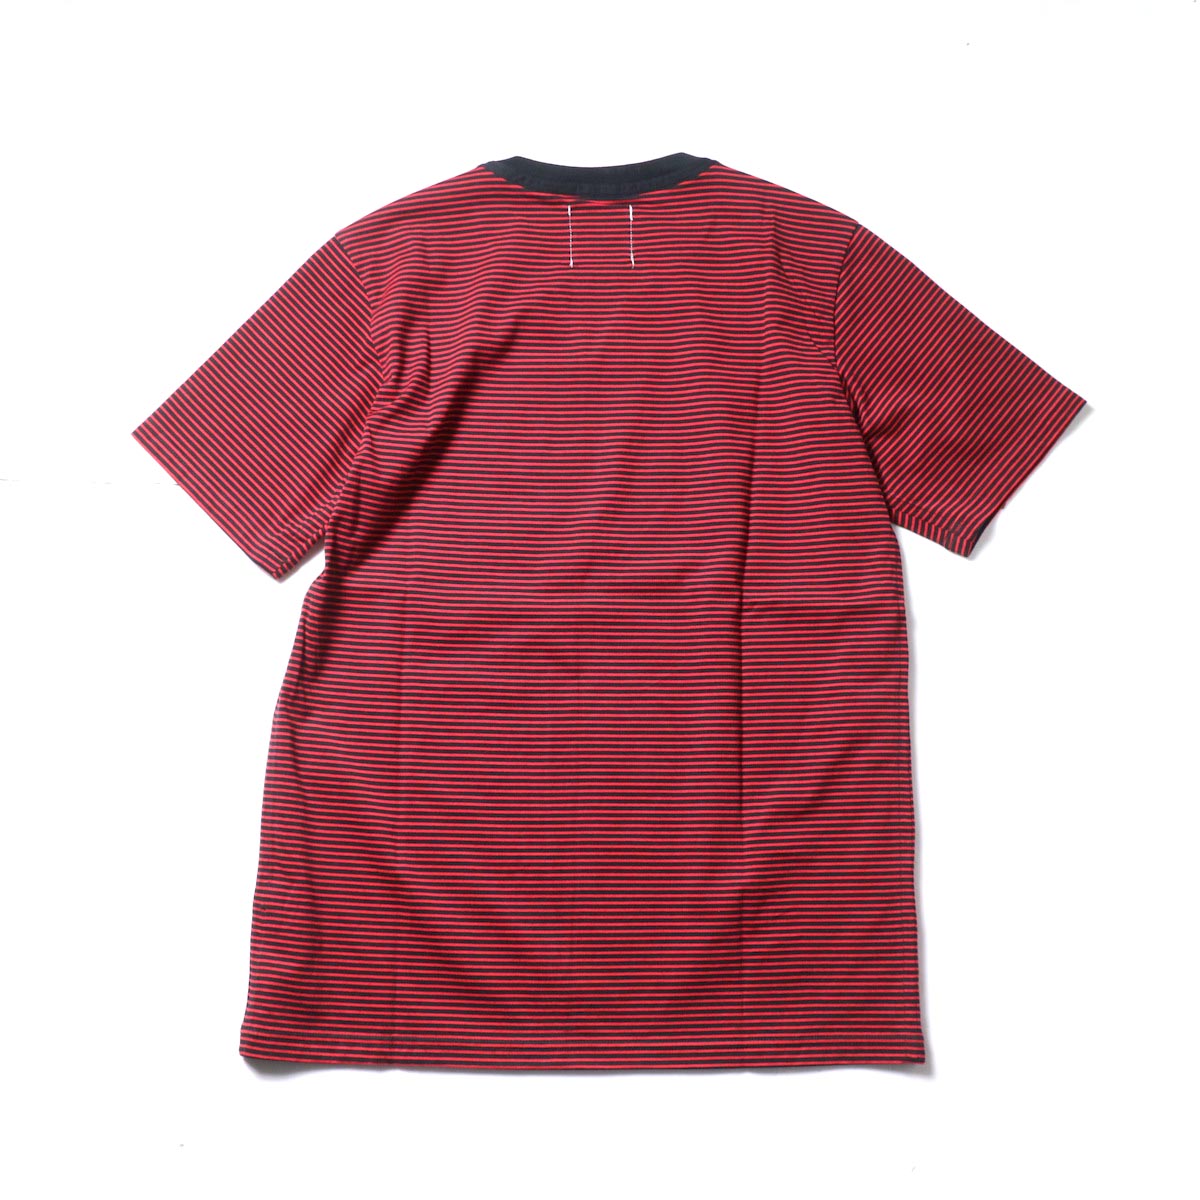 The Soloist / swc.0009a crew neck s/s striped tee. (Black × Red)背面